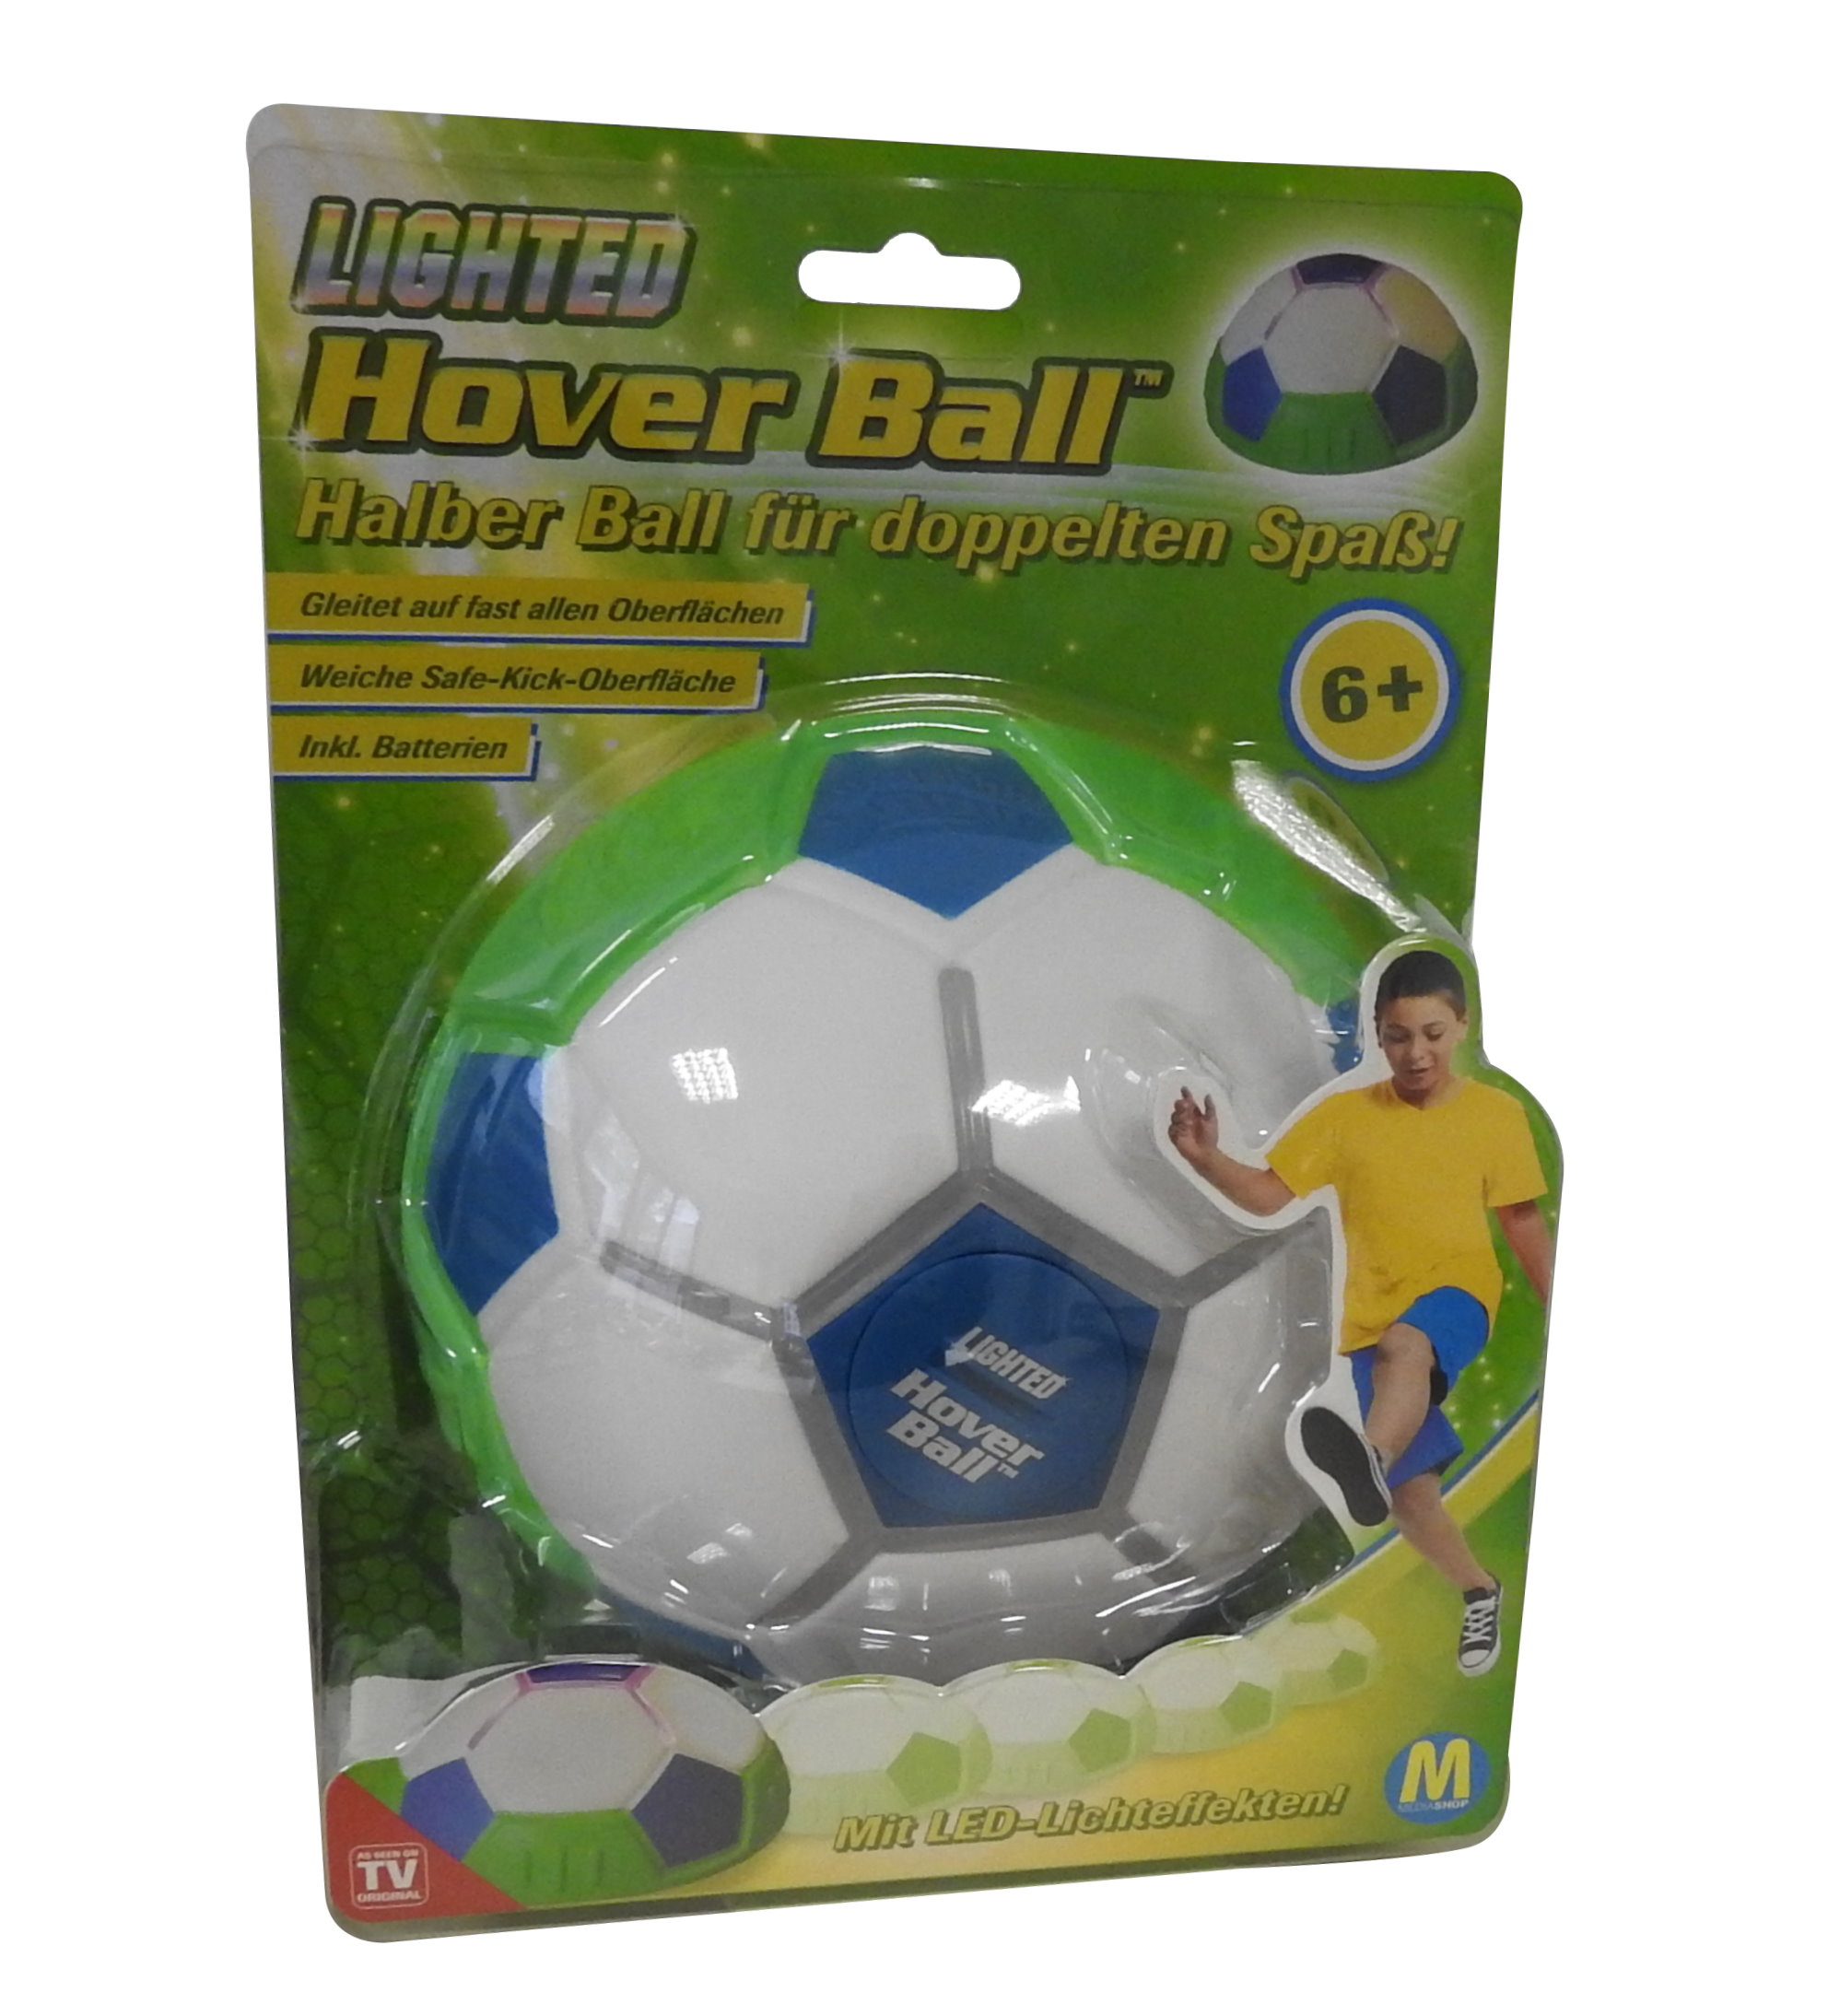 Baztoy Air Power Fußball Hover Power Ball Indoor Fußball mit LED Beleu –